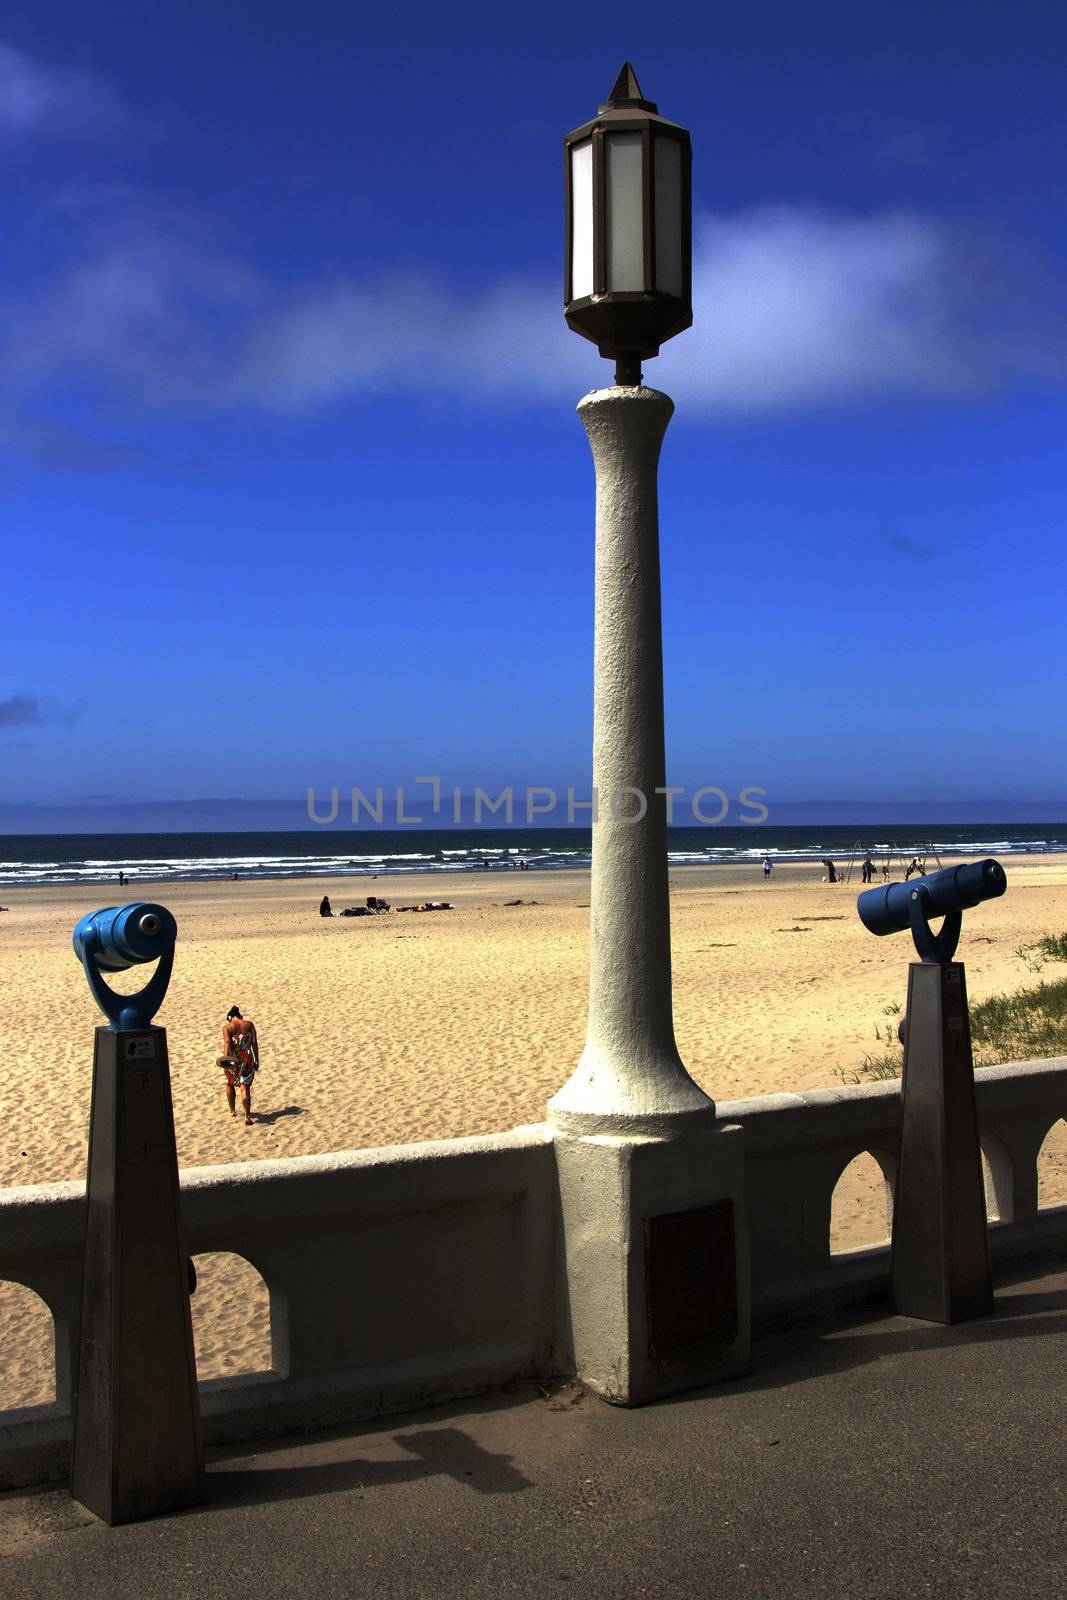 Monoculars and a light post overlooking the beach. by Rigucci